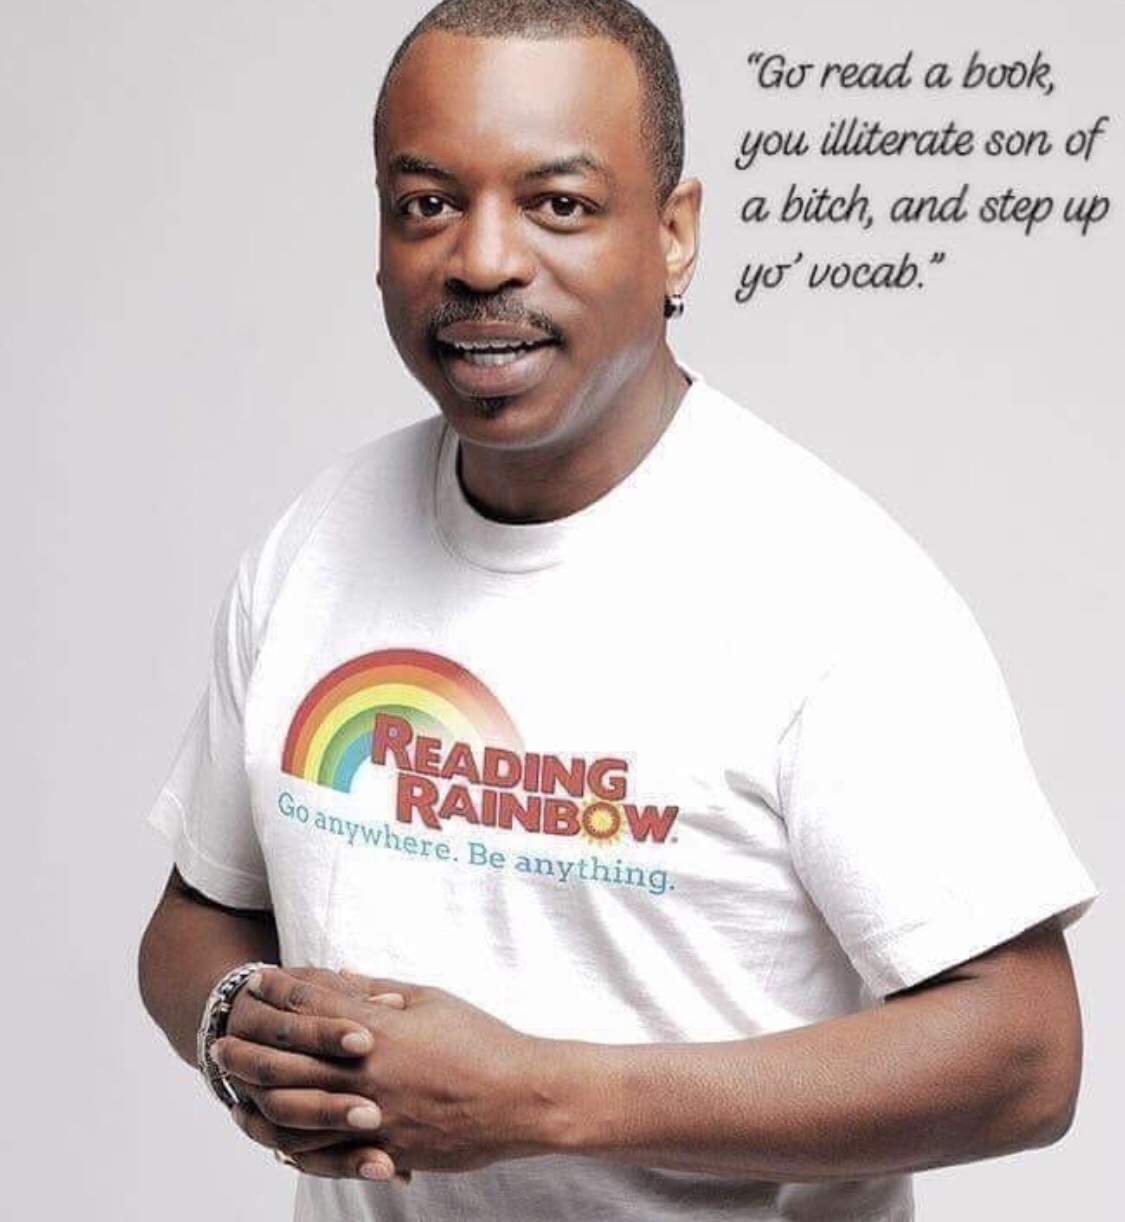 memes - levar burton reading rainbow meme - "Go read a book, you illiterate son of a bitch, and step up yo'vocab." Reading Rainbow anywhere. Be anything.